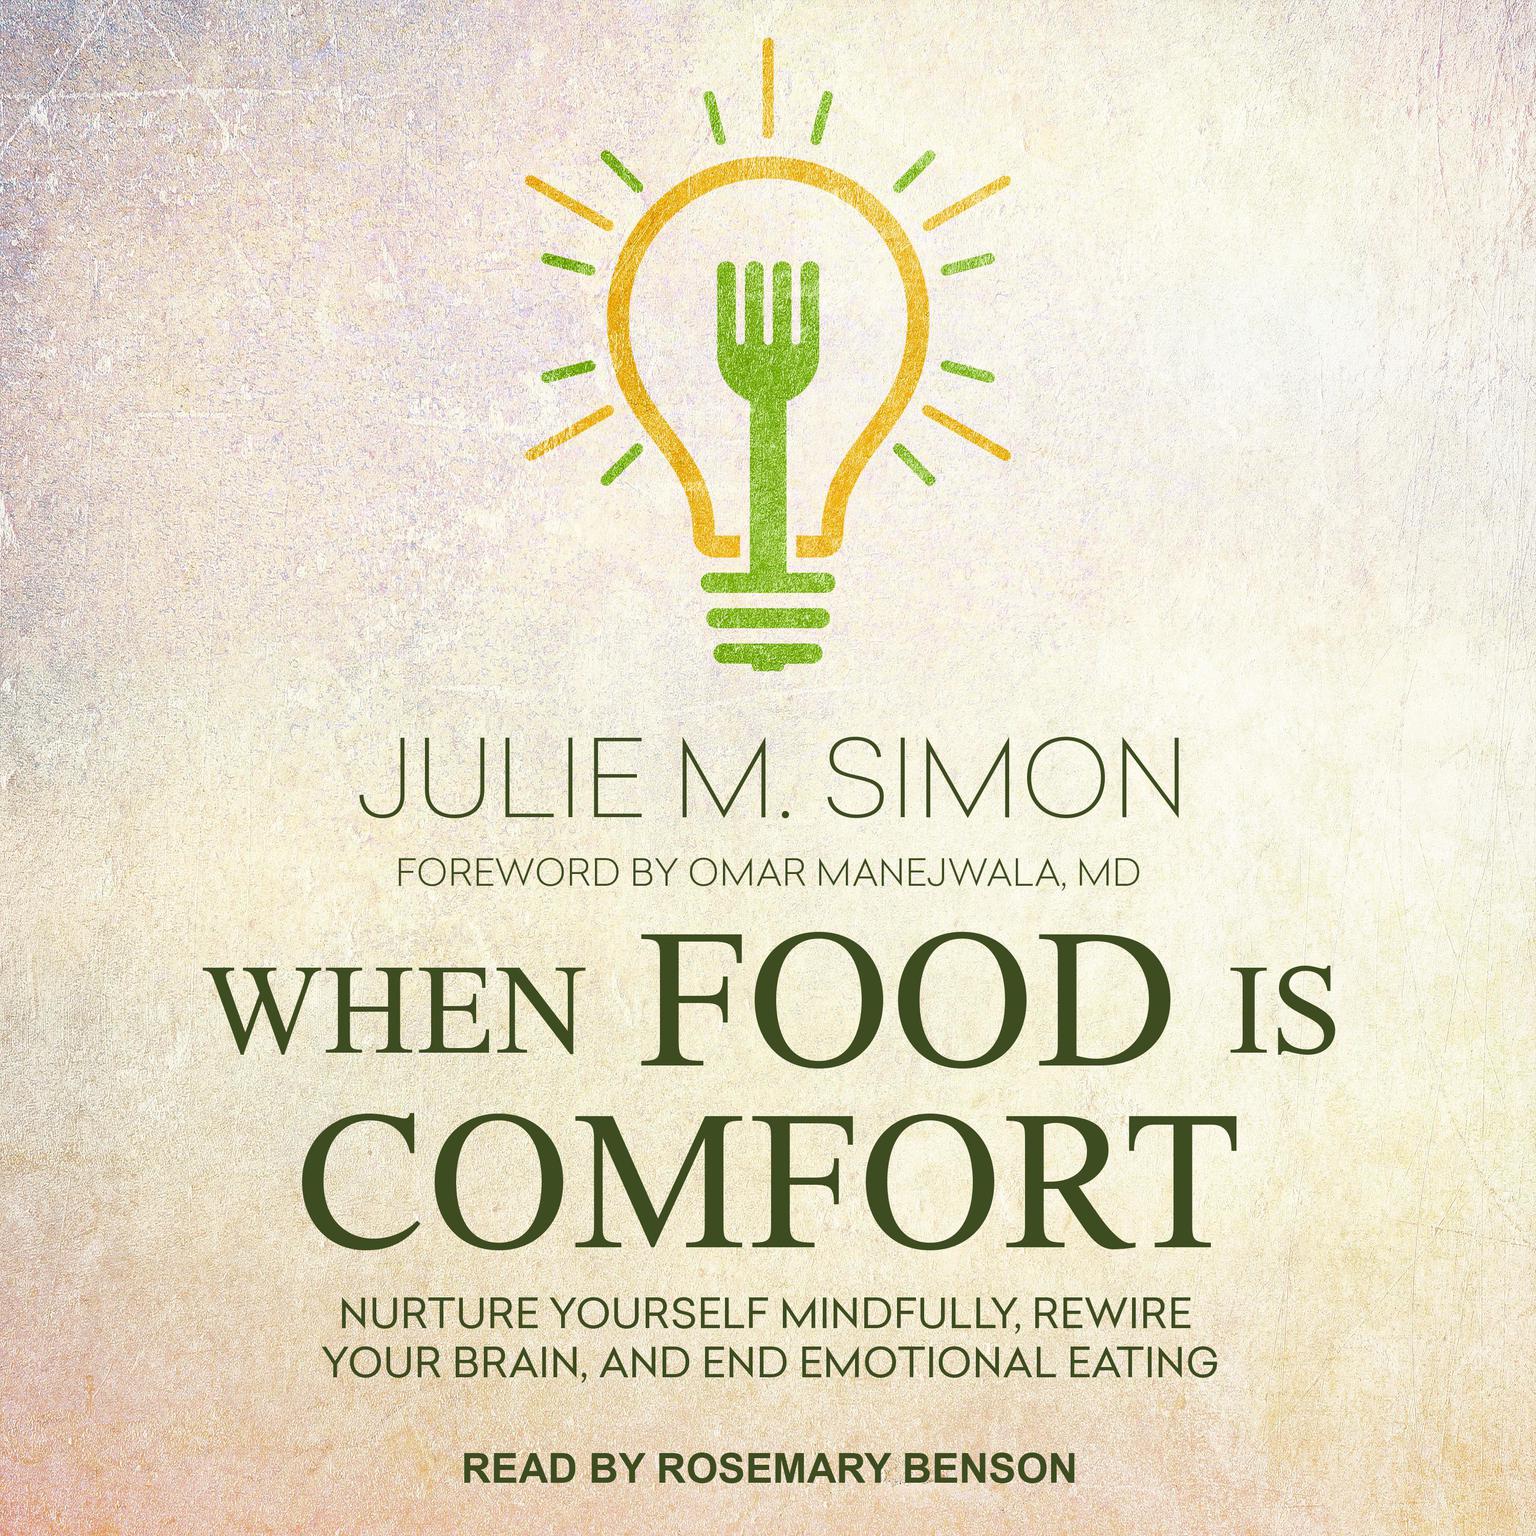 When Food Is Comfort: Nurture Yourself Mindfully, Rewire Your Brain, and End Emotional Eating Audiobook, by Julie M. Simon